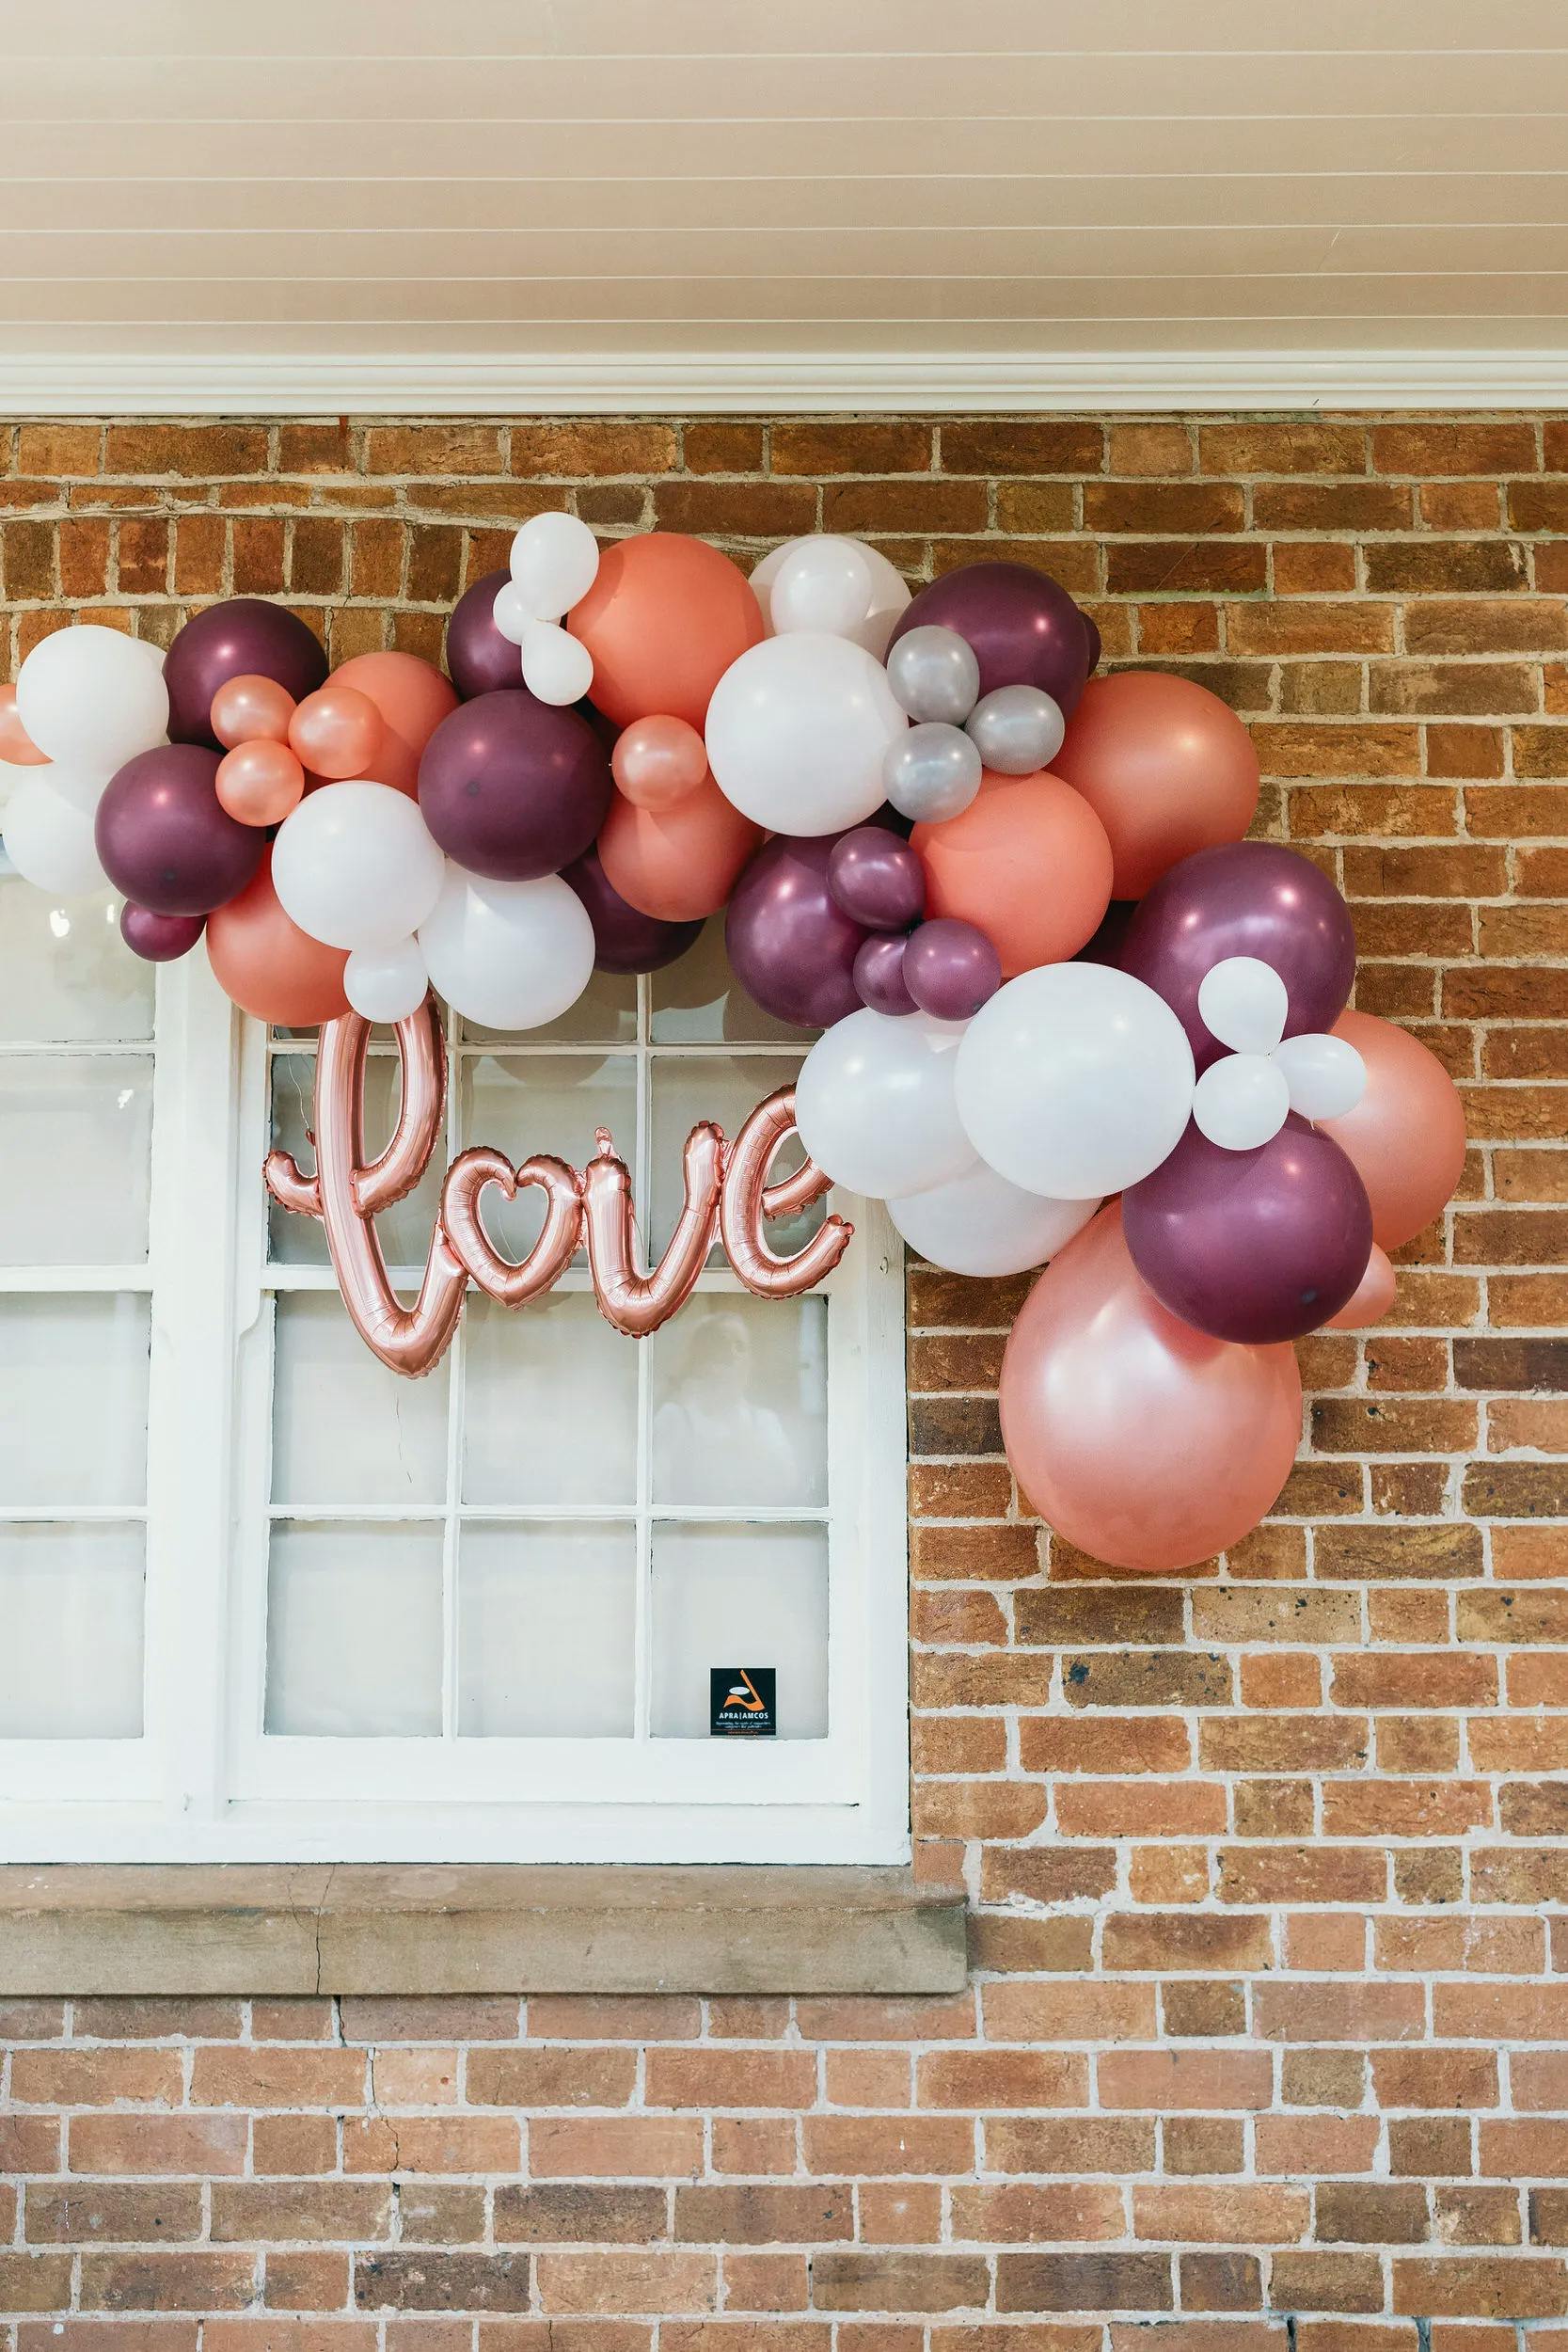 A decorative arrangement of white, pink, peach, and purple balloons is arching over a window against a brick wall. In the middle of the balloon arch hangs a shiny metallic pink balloon spelling "love" with a heart shape forming the letter O.